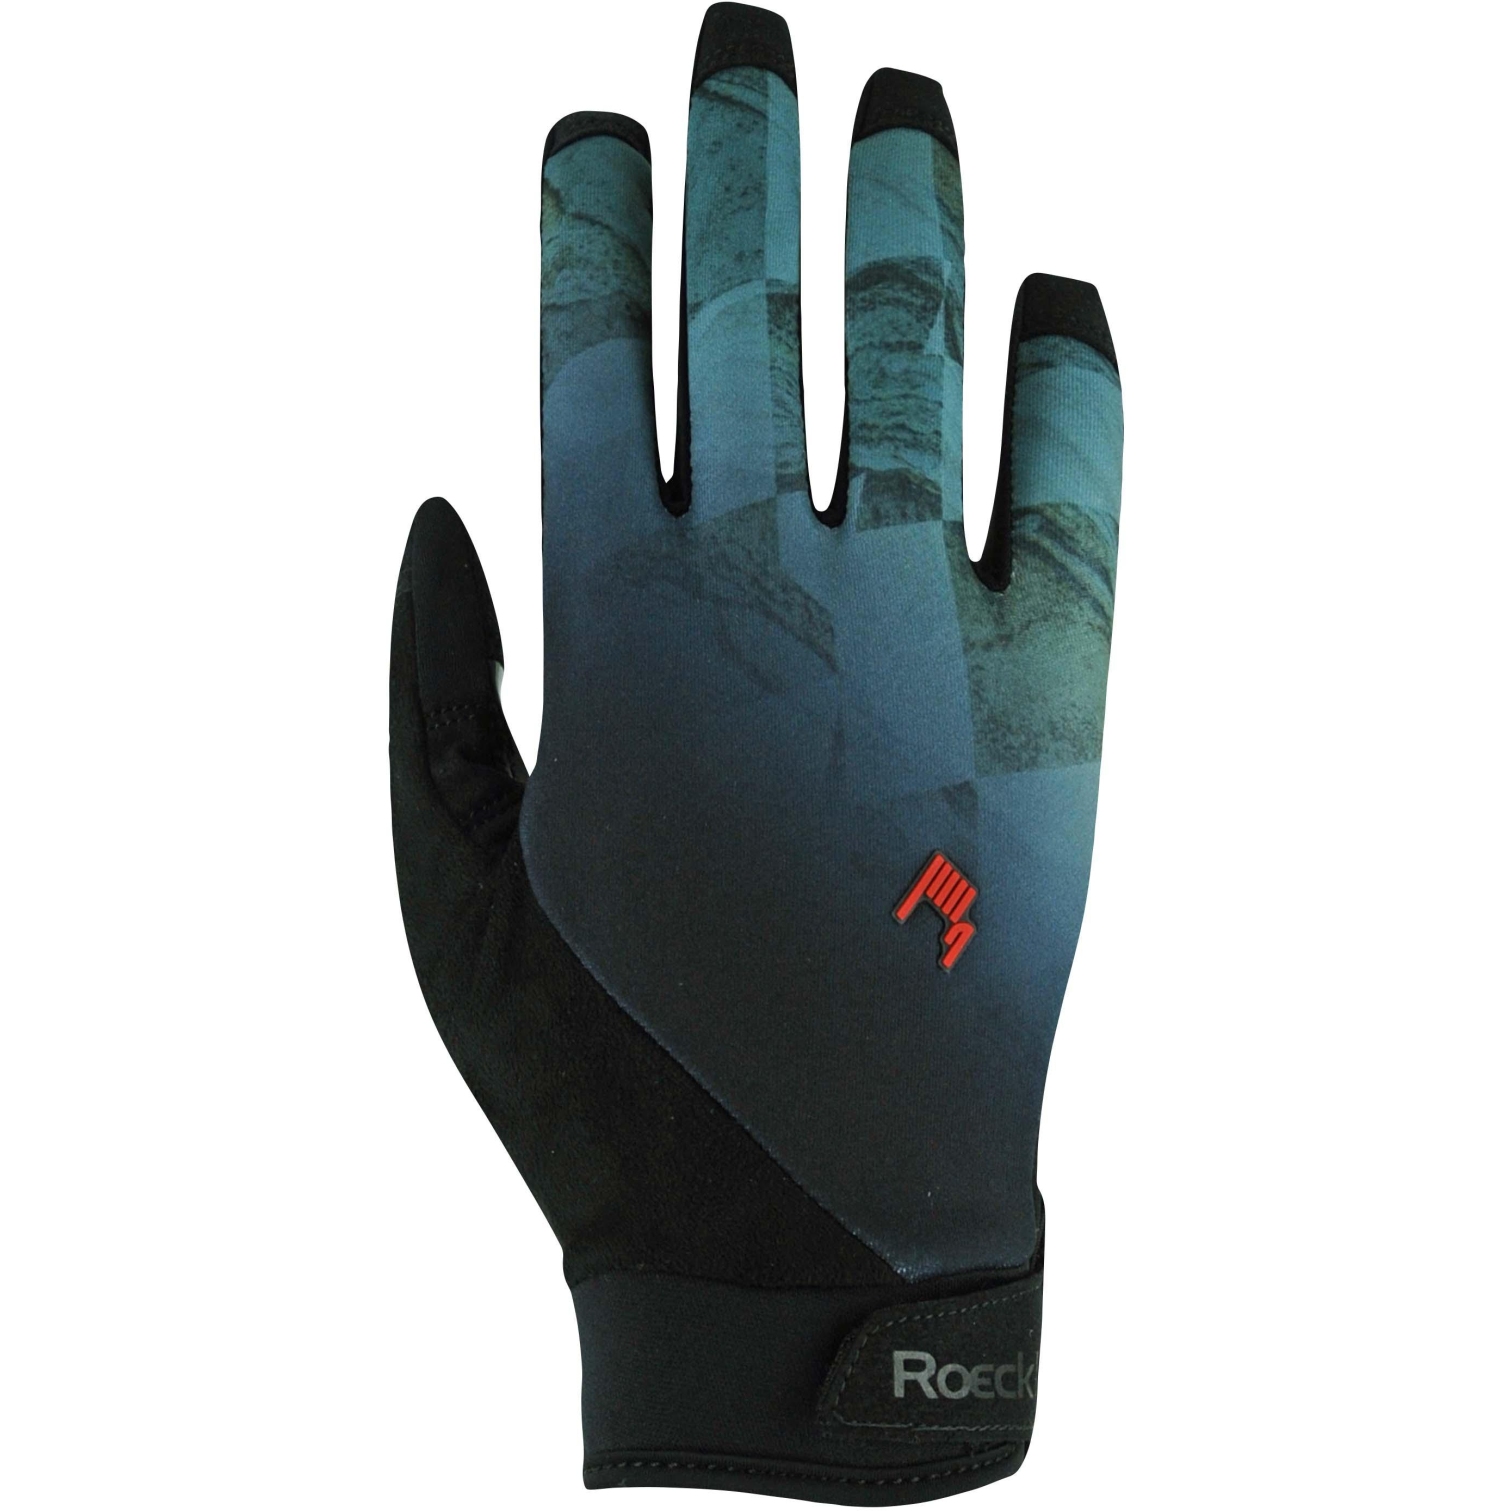 Picture of Roeckl Sports Montan Cycling Gloves - arctic 5310